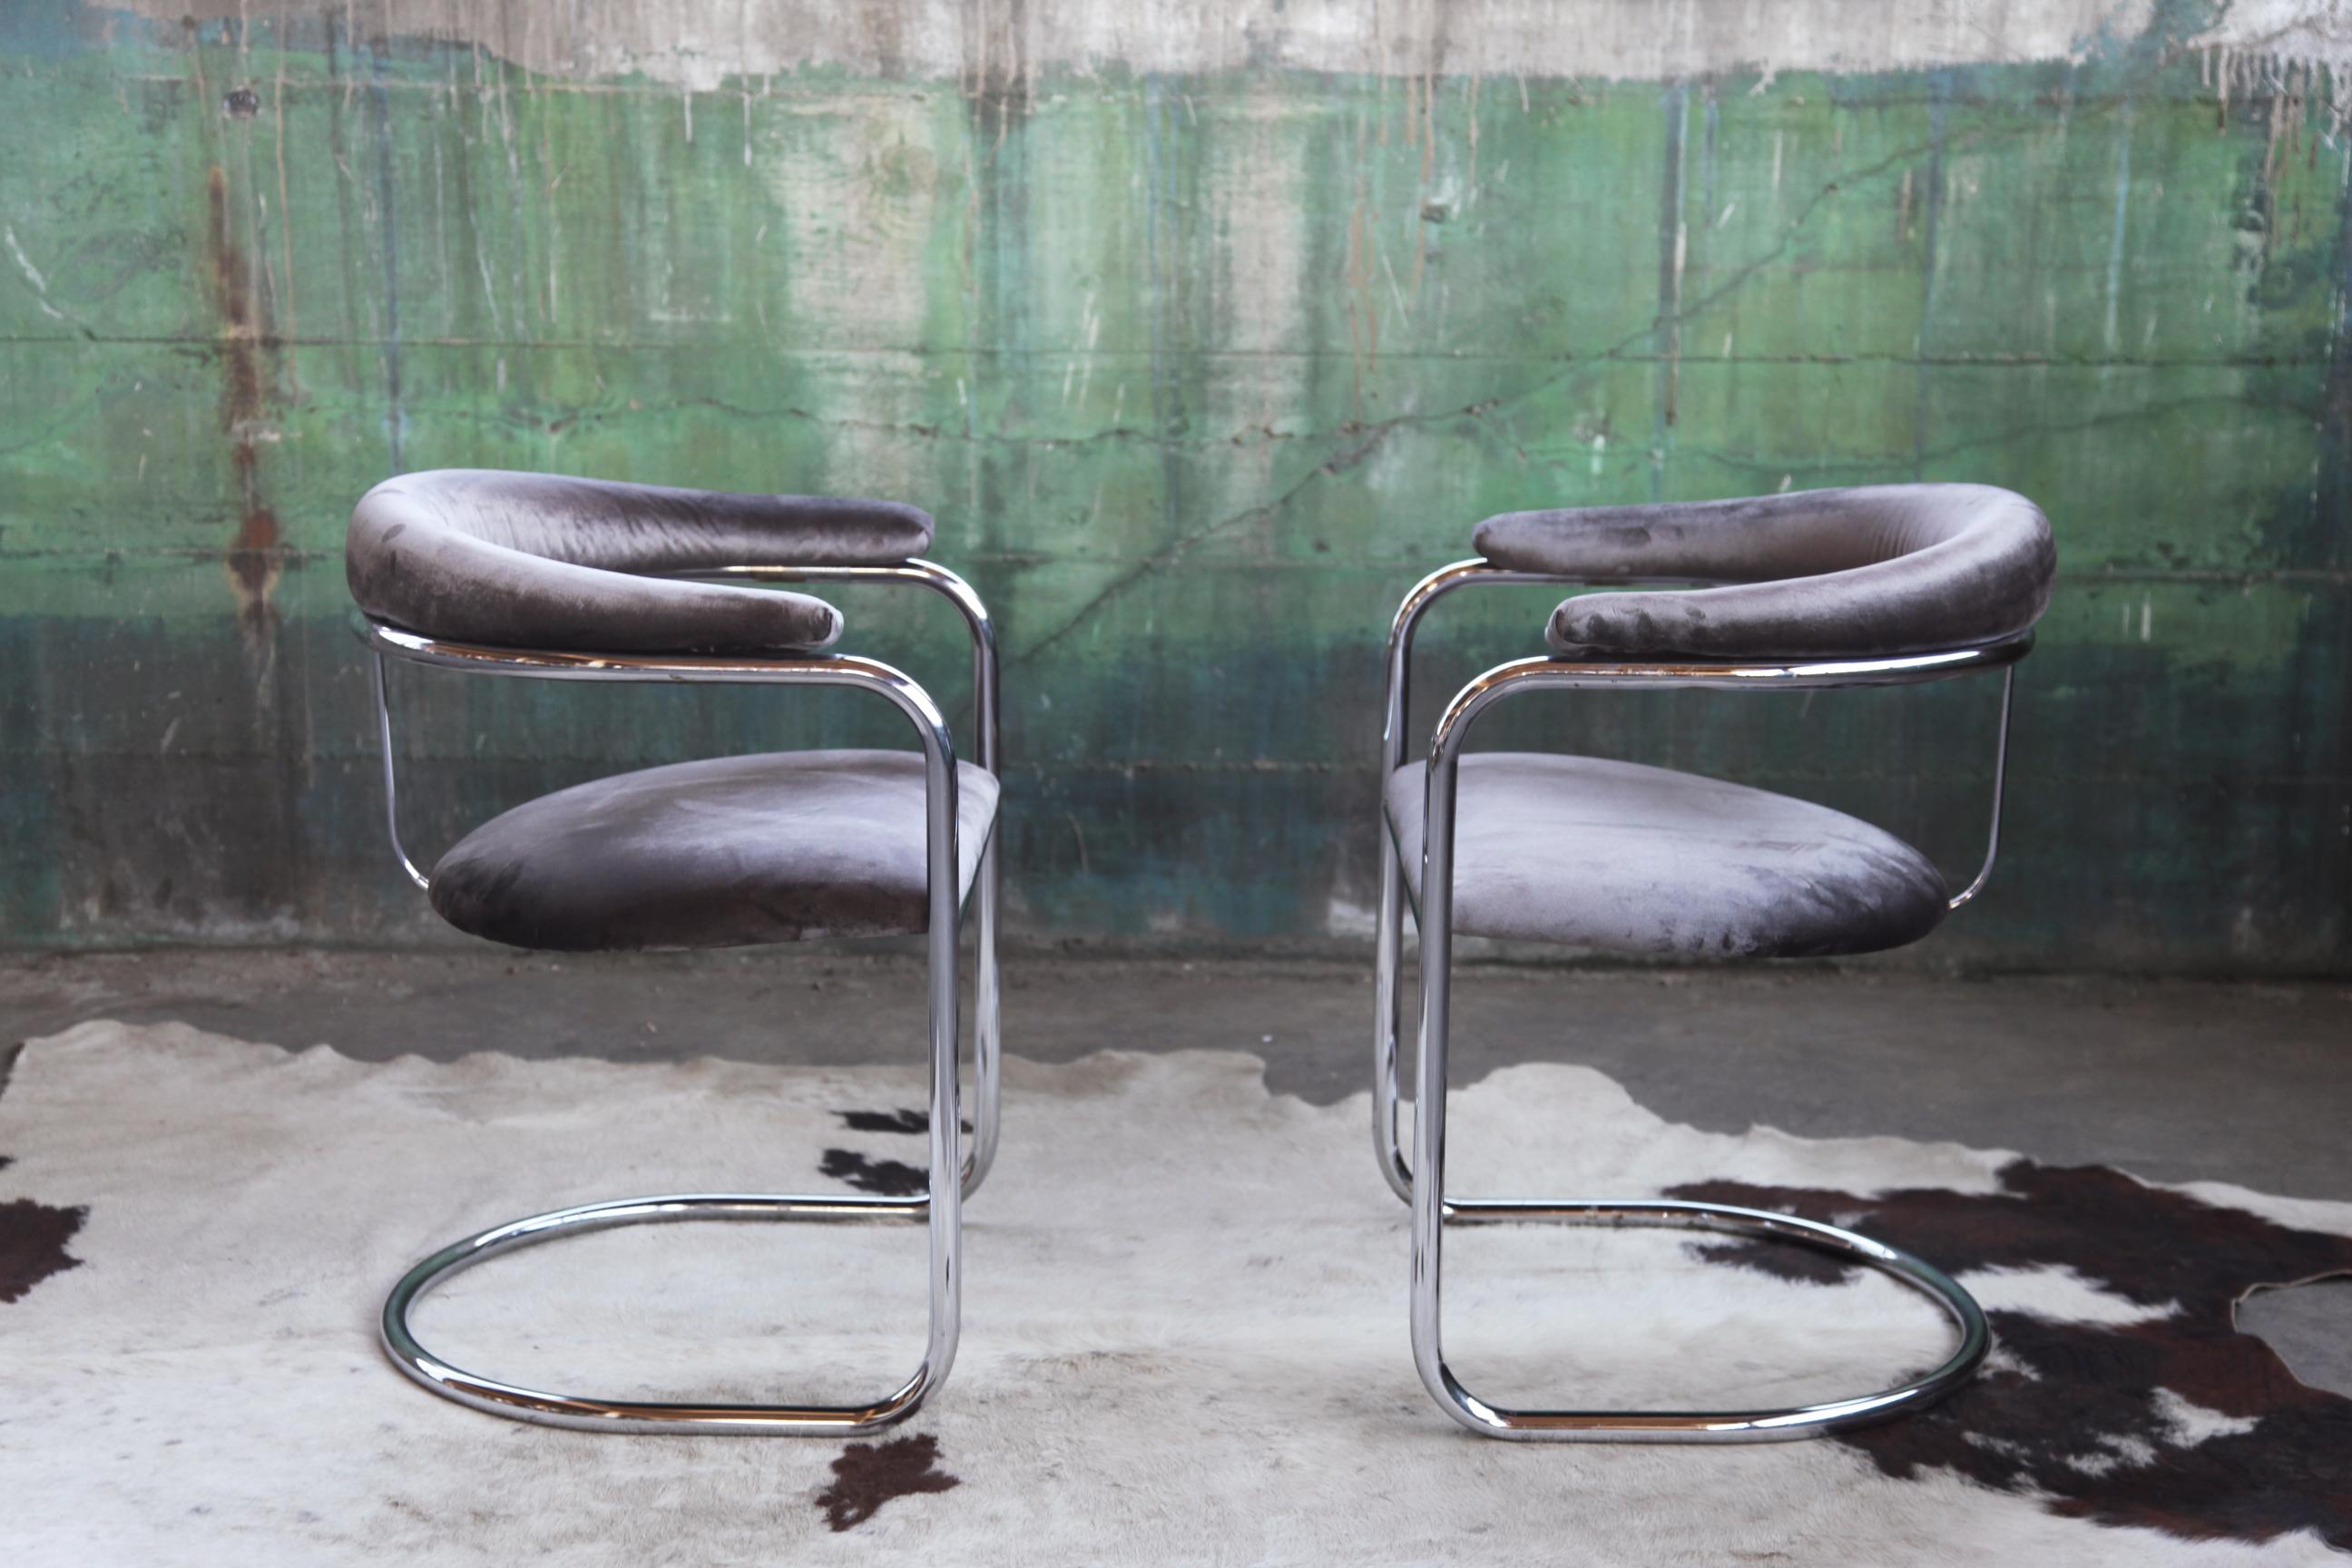 Pair of Mid-Century Modern Anton Lorenz for Thonet Bent Chrome Cantilever Chairs 1